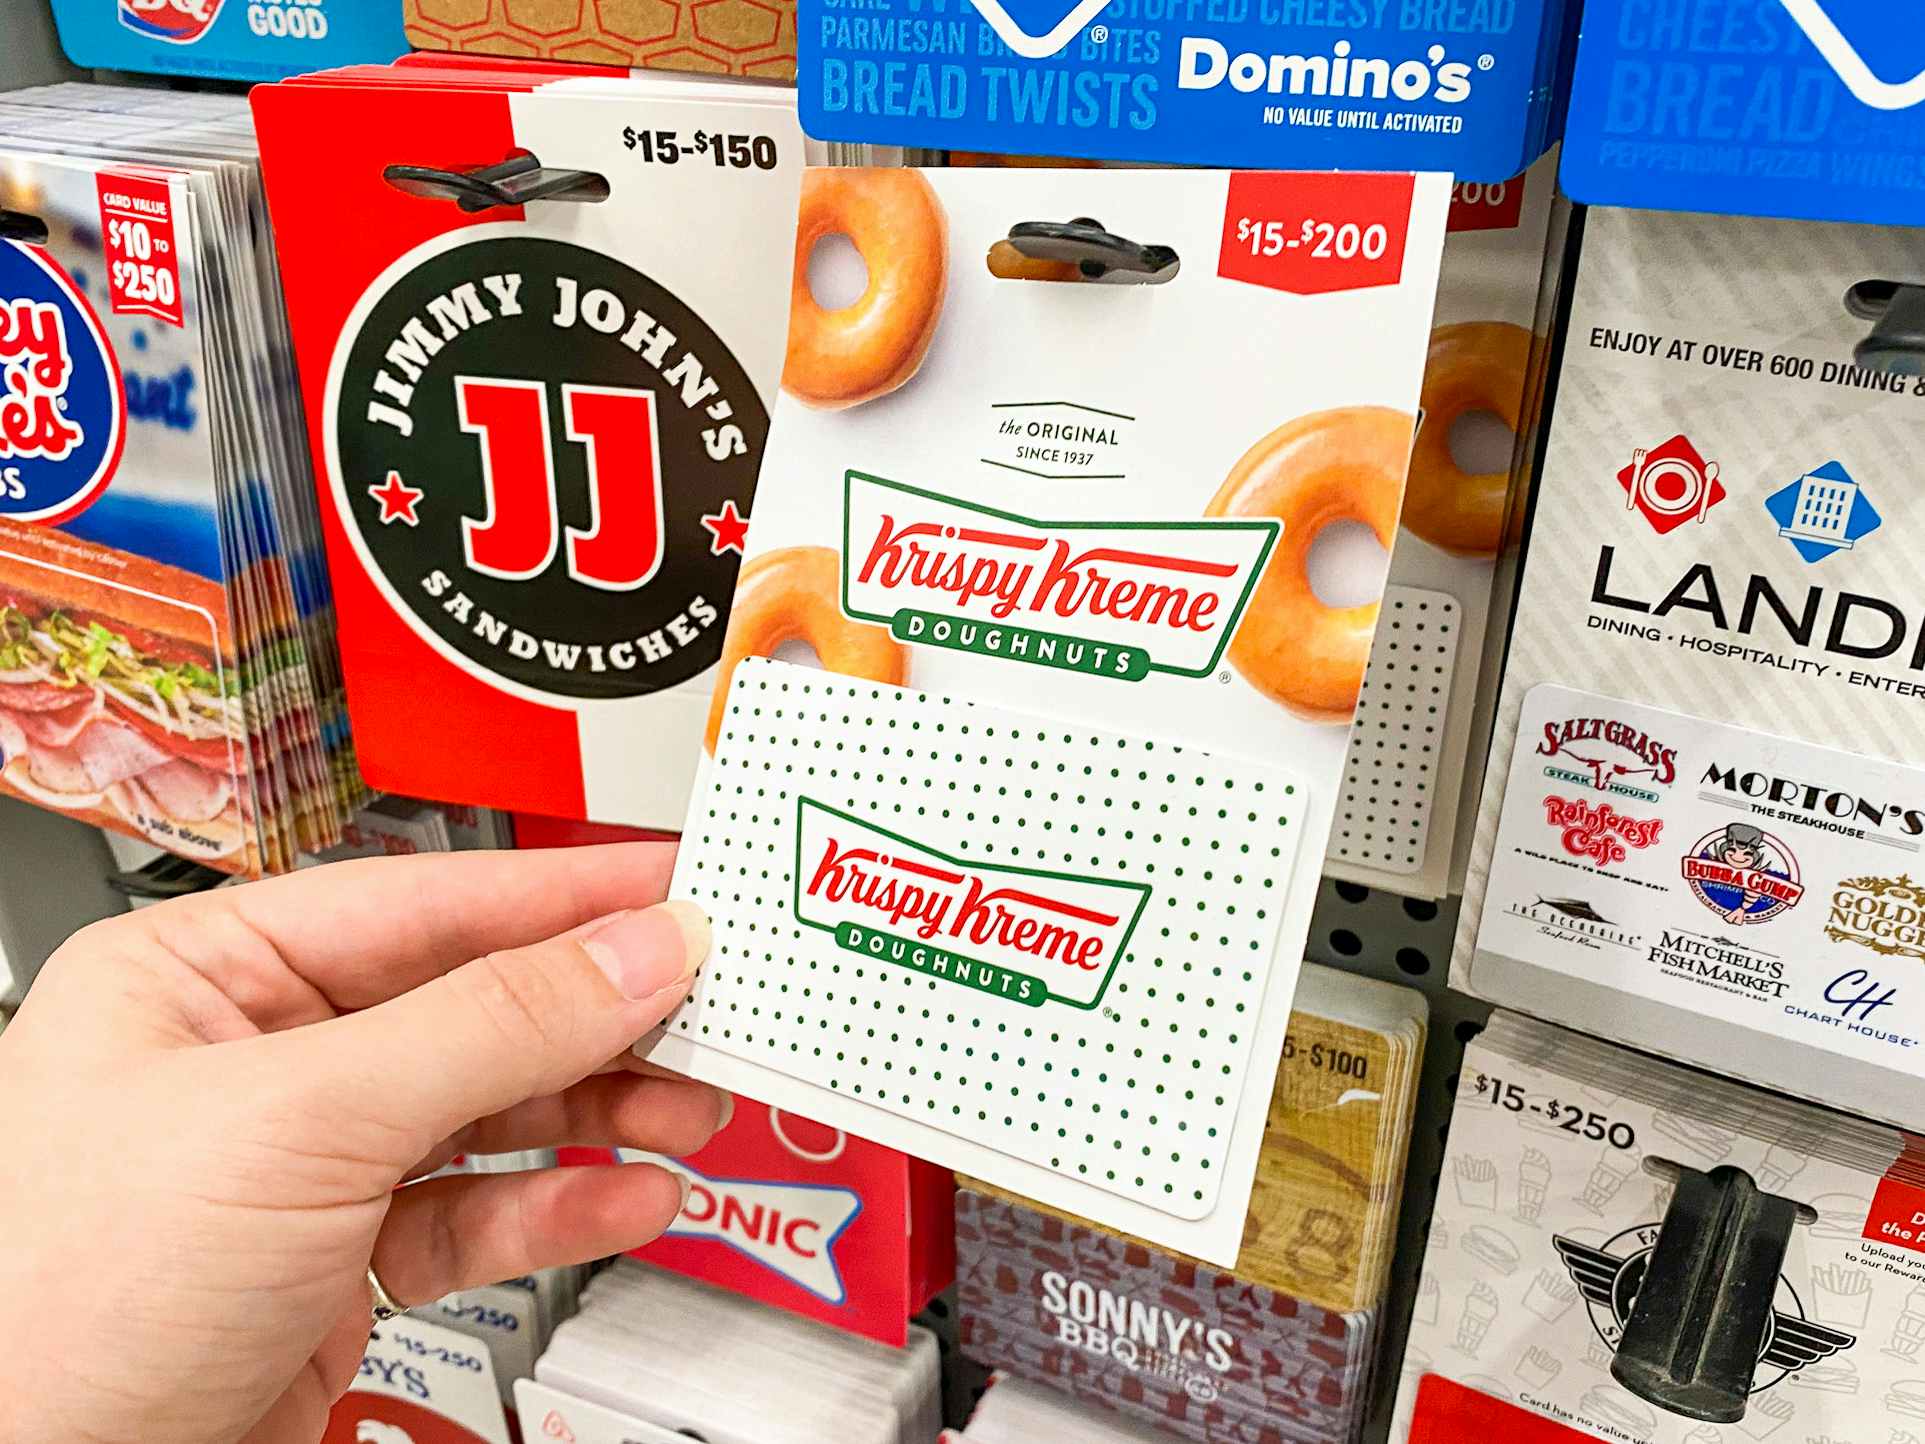 A person's hand taking a Krispy Kreme gift card from a display of gift cards at Walmart.